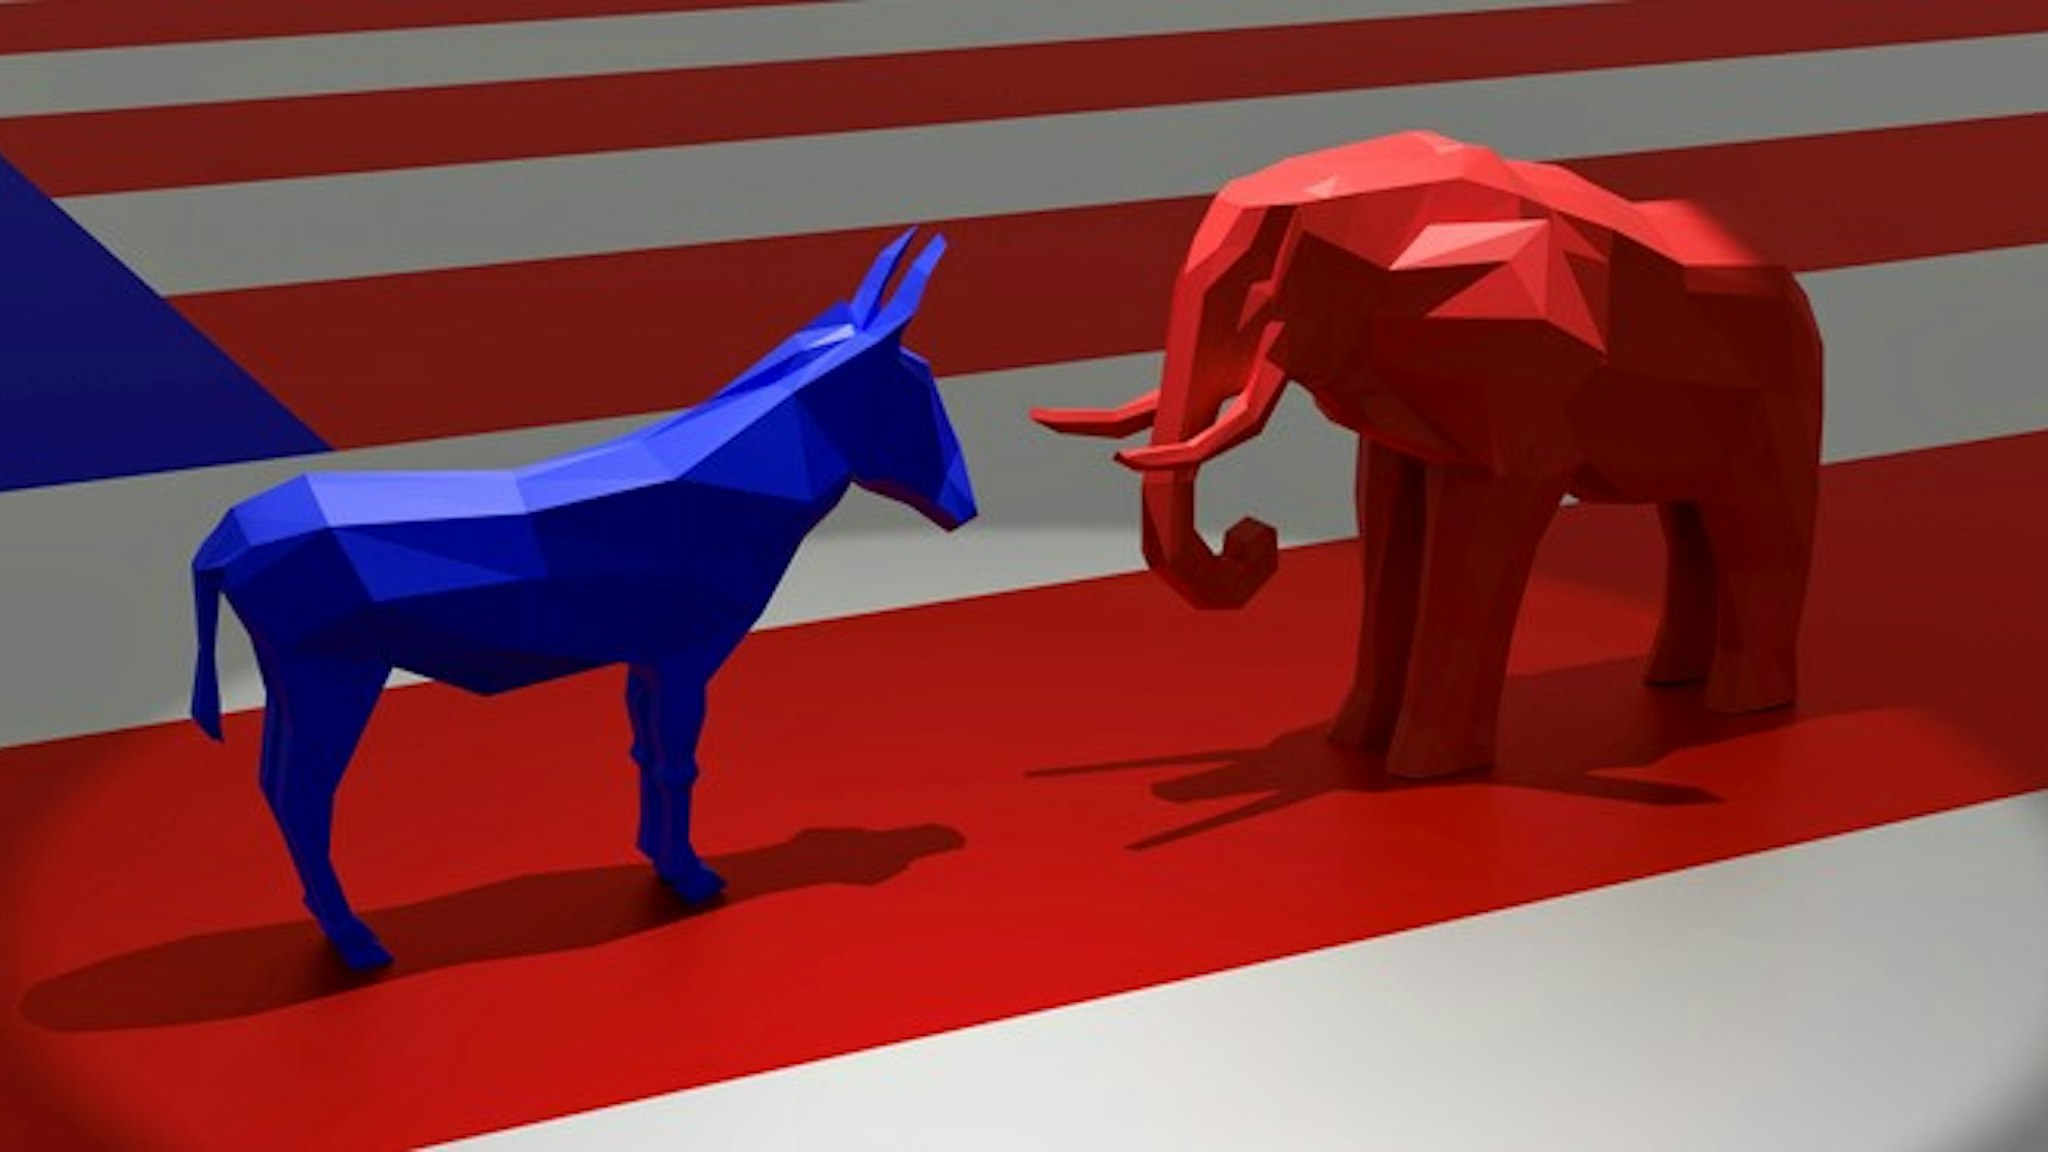 Rendering of the blue donkey and the red elephant in a spotlight representing the Democratic and Republican political parties, respectively, on top of the American Flag.